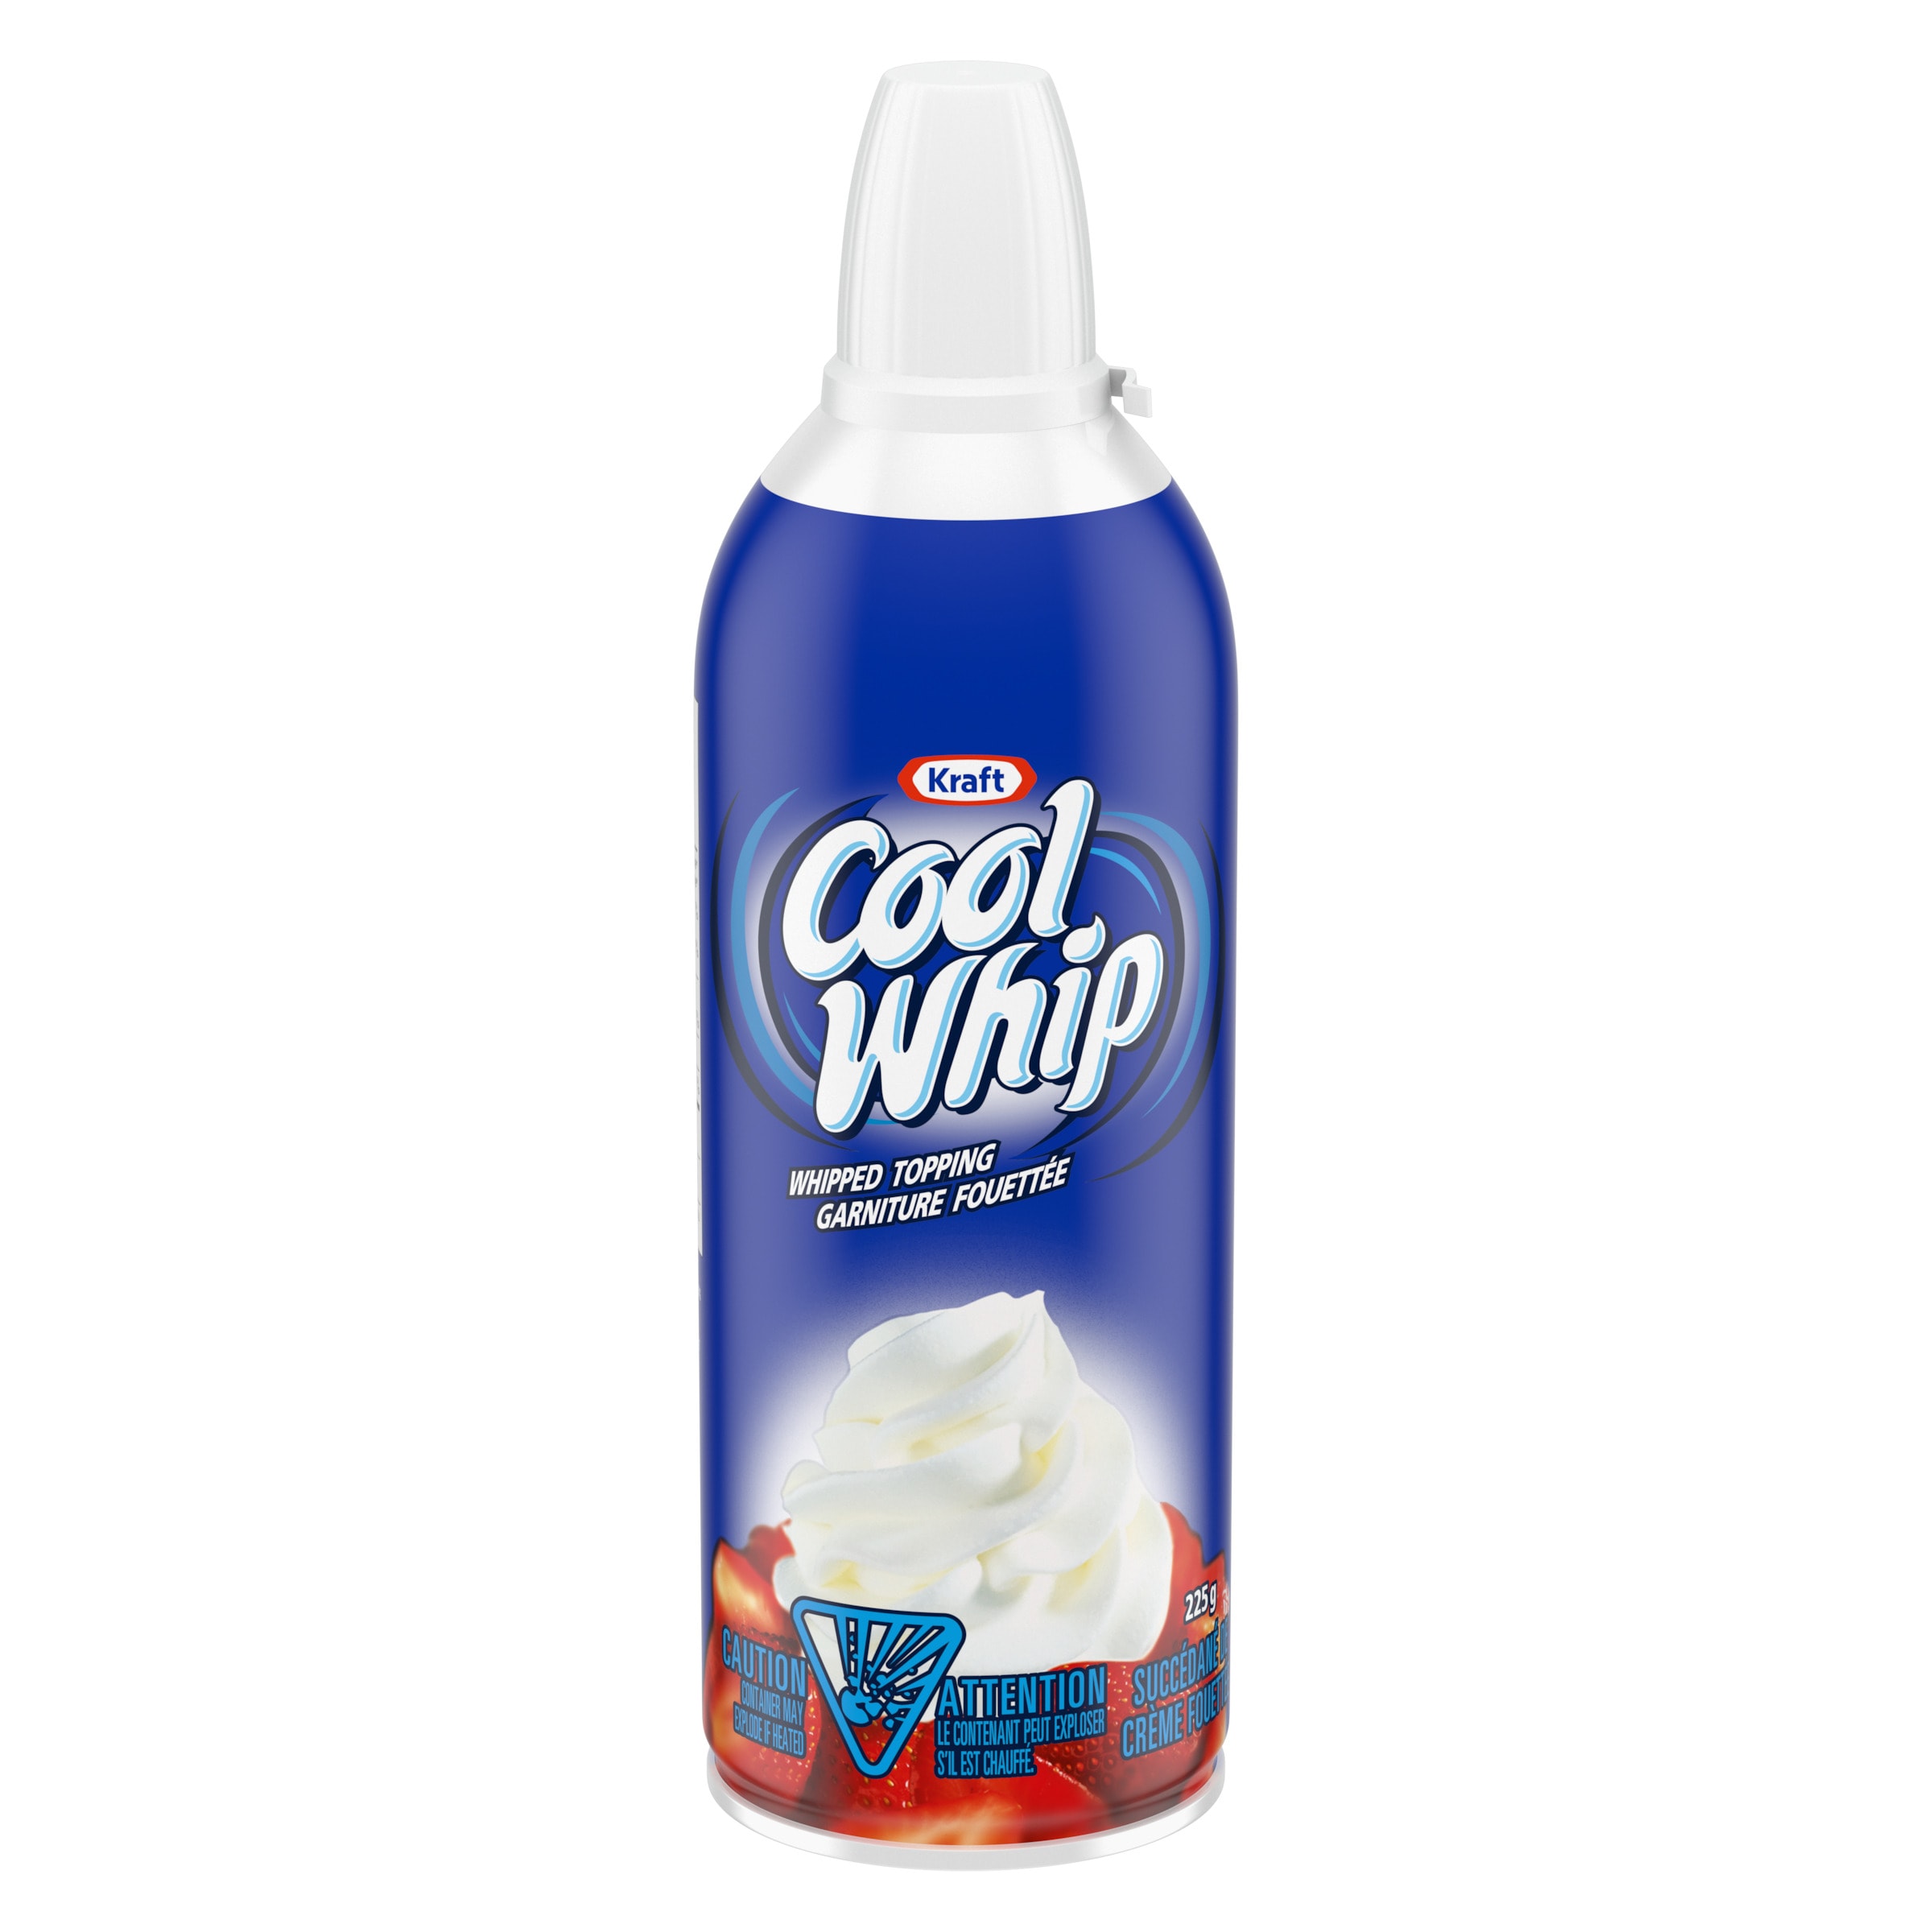 Original Whipped Topping